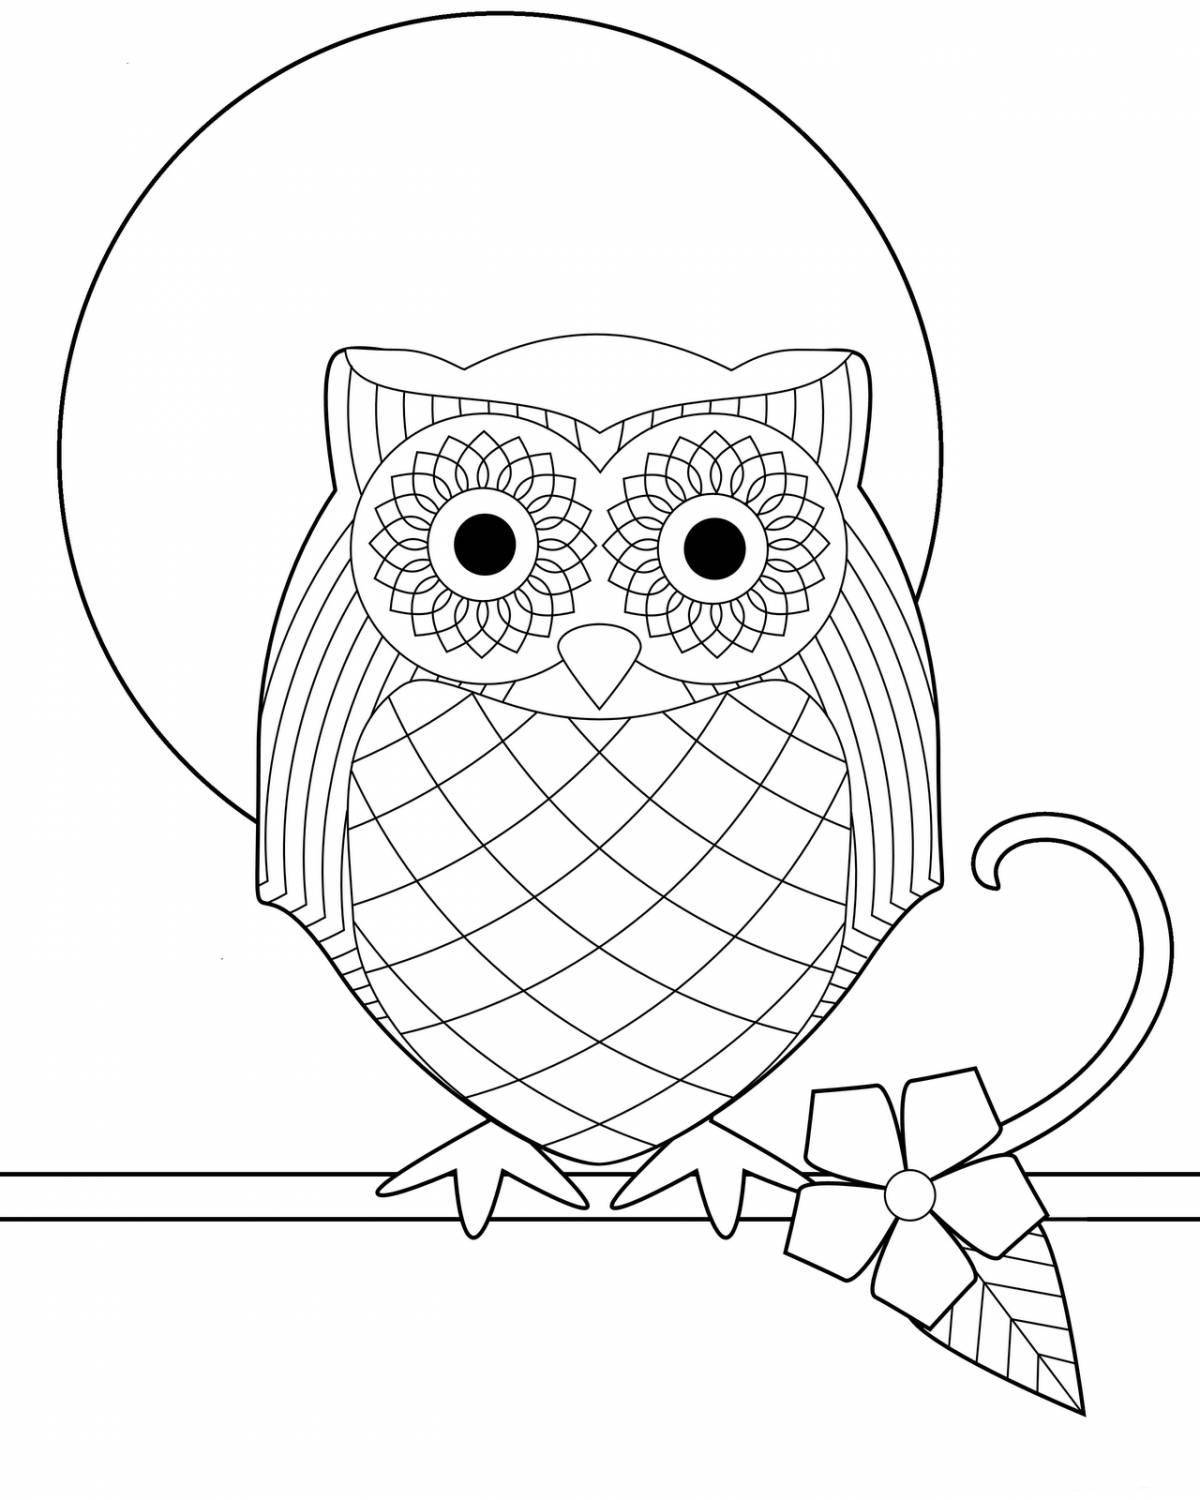 Colored owl coloring page for 3-4 year olds